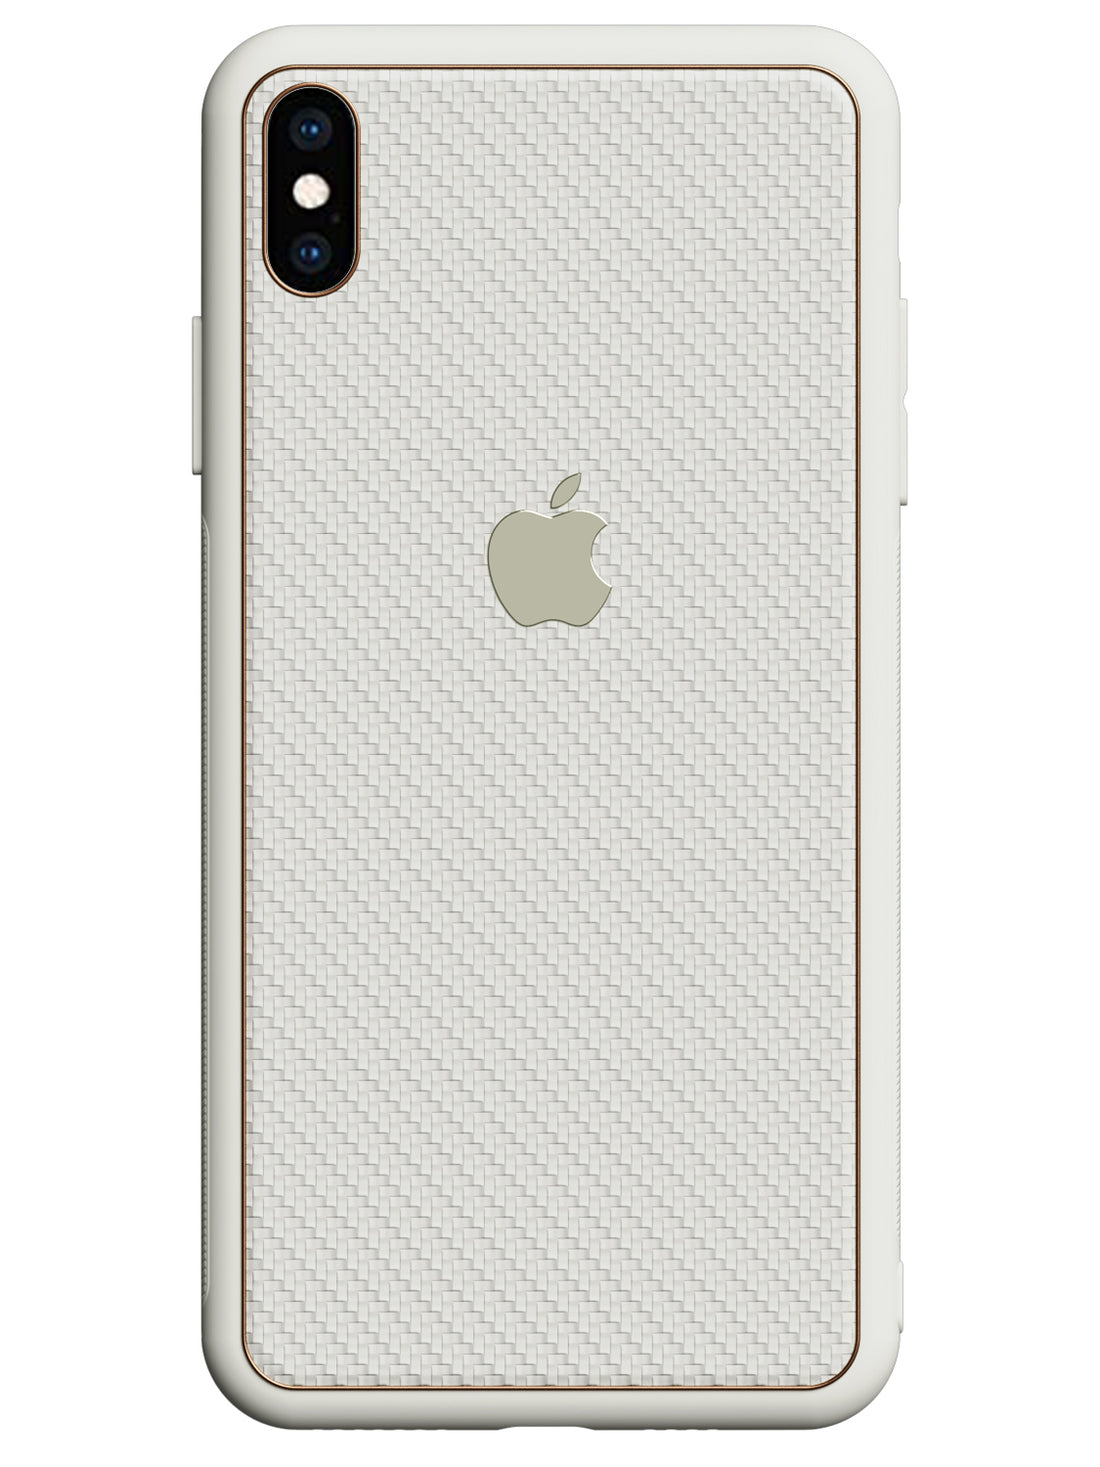 Carbon Leather Chrome Case - iPhone XS Max (White)